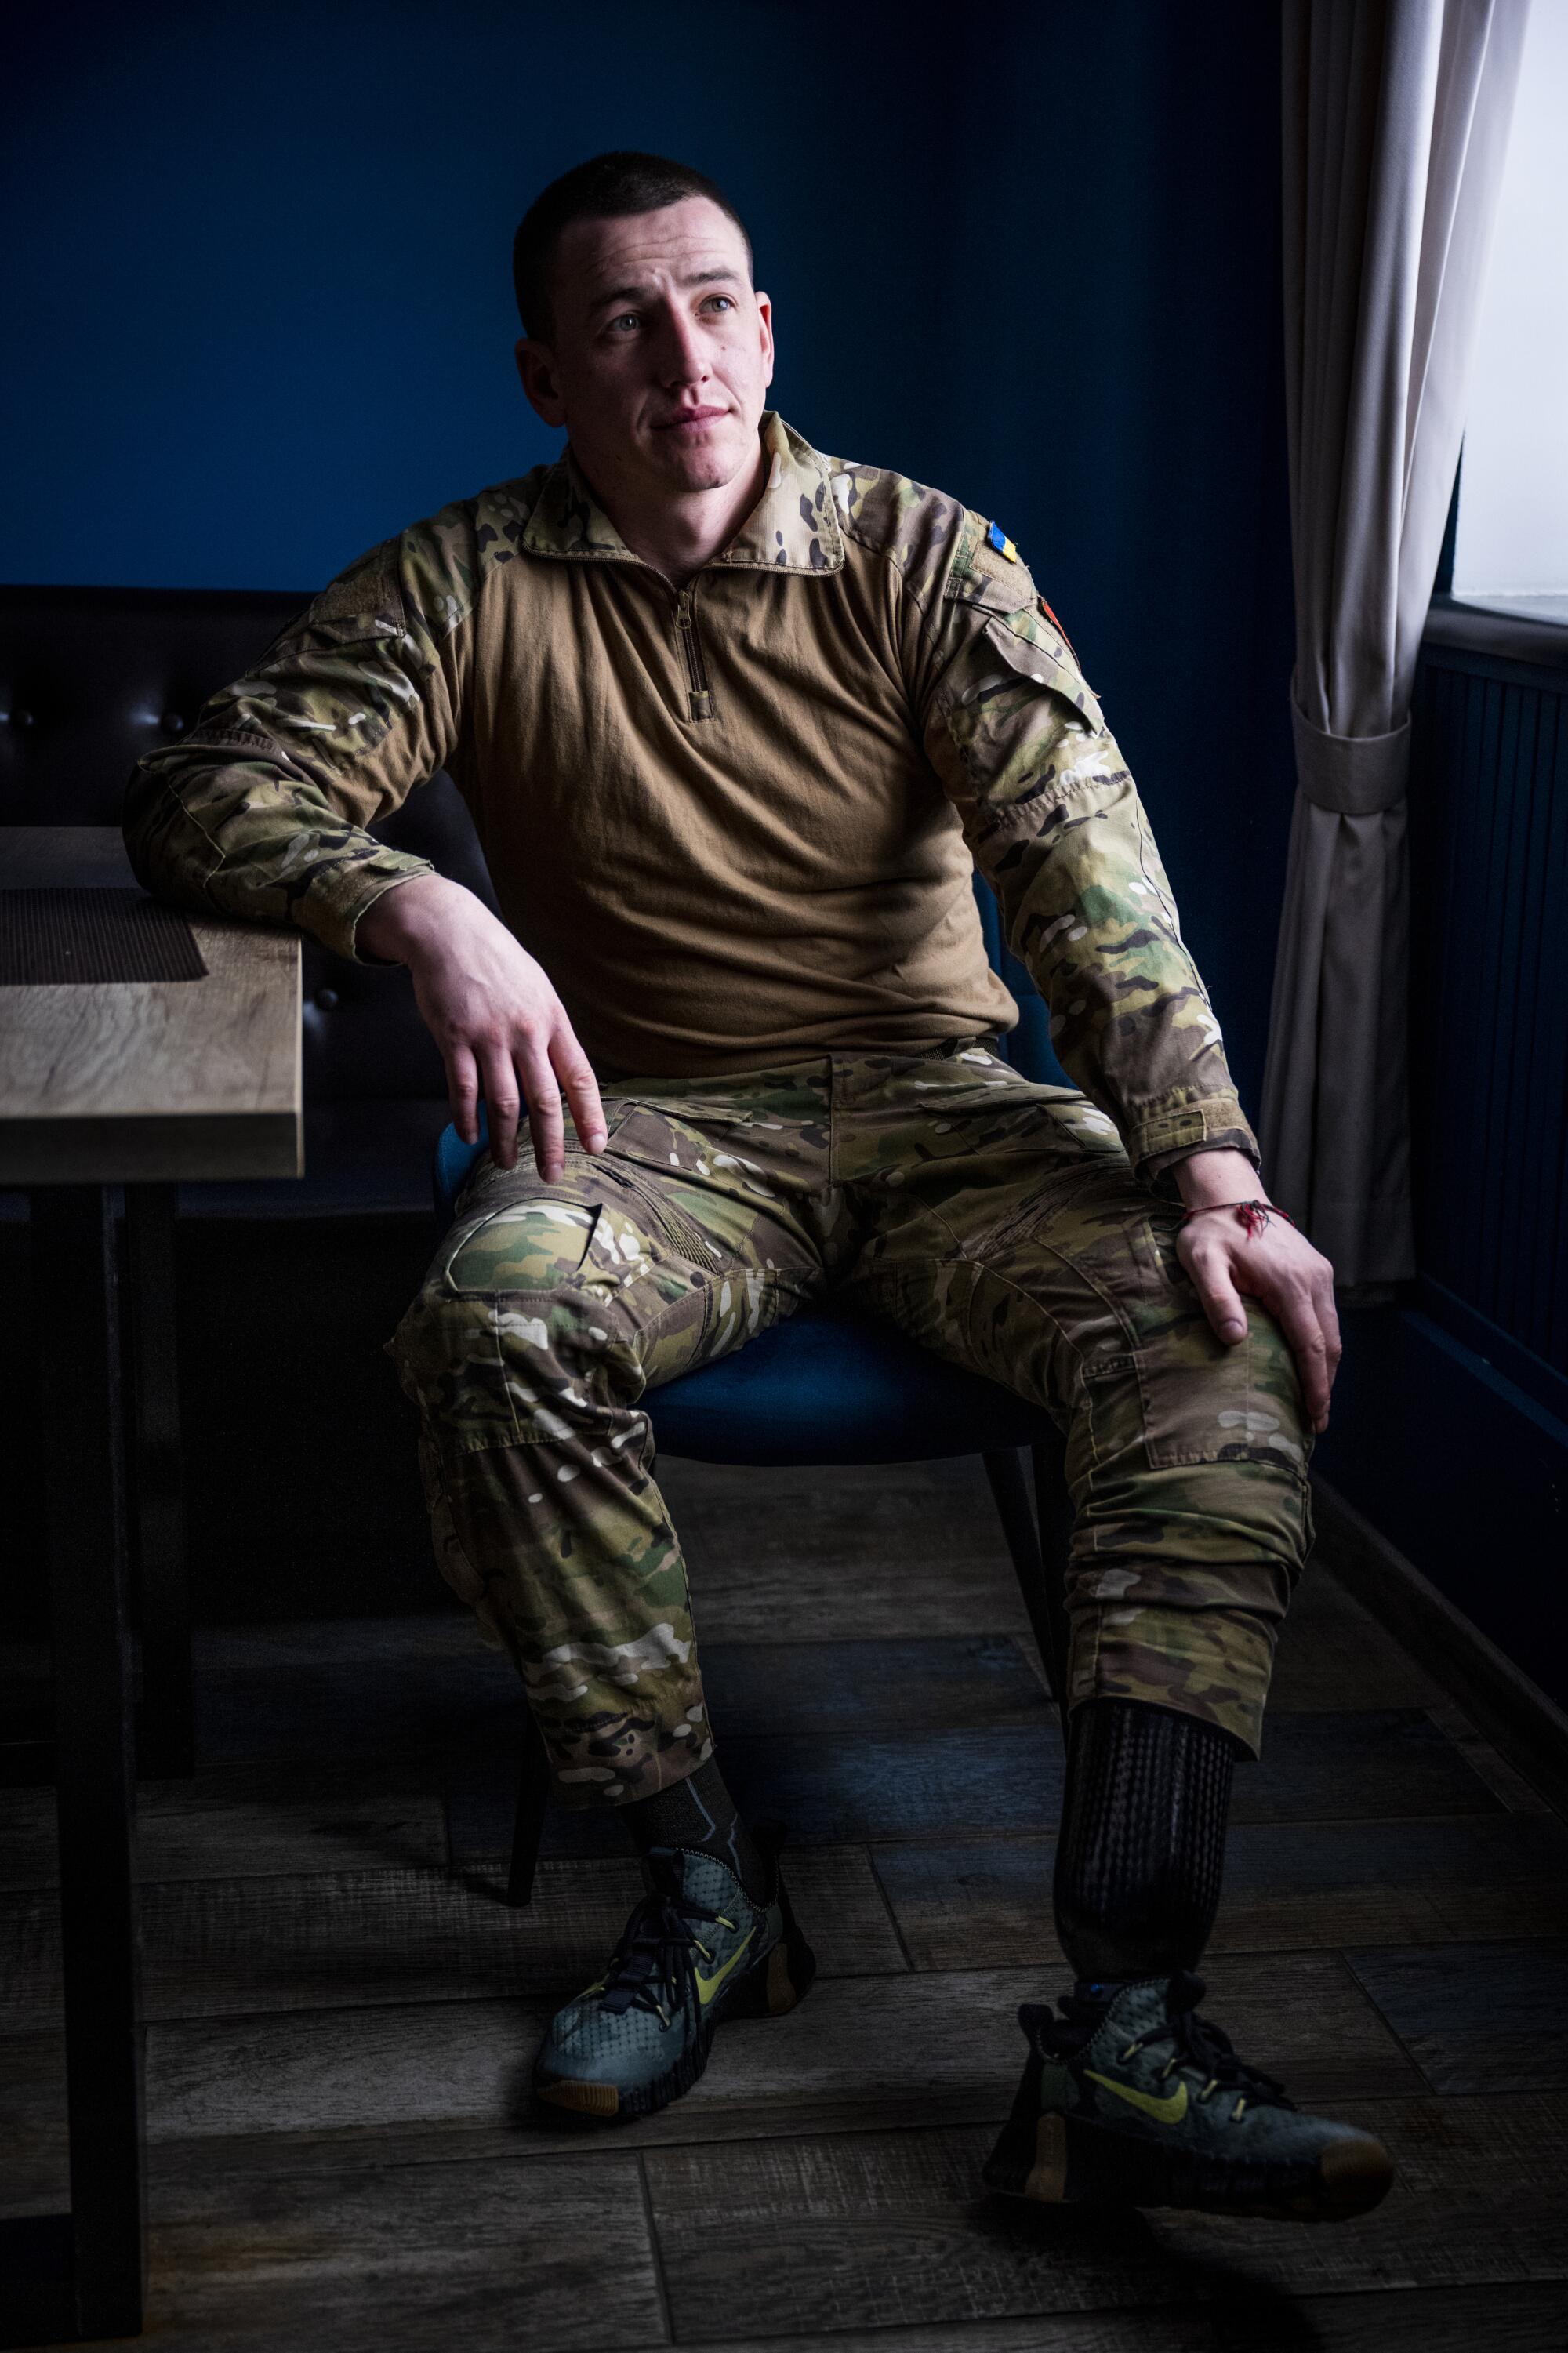 A portrait of a seated man in camouflage staring off into the distance  